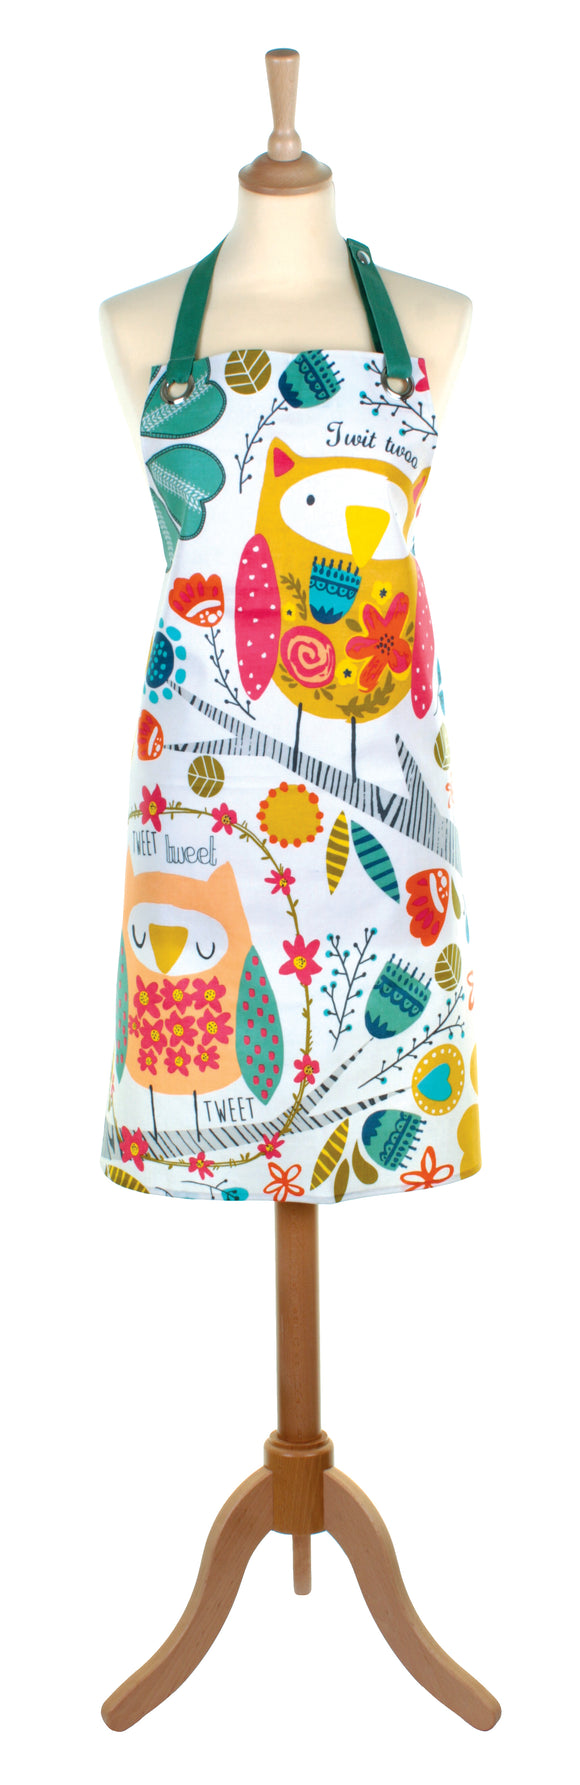 Oil Cloth Apron Twit Twoo by Ulster Weavers - Gifteasy Online